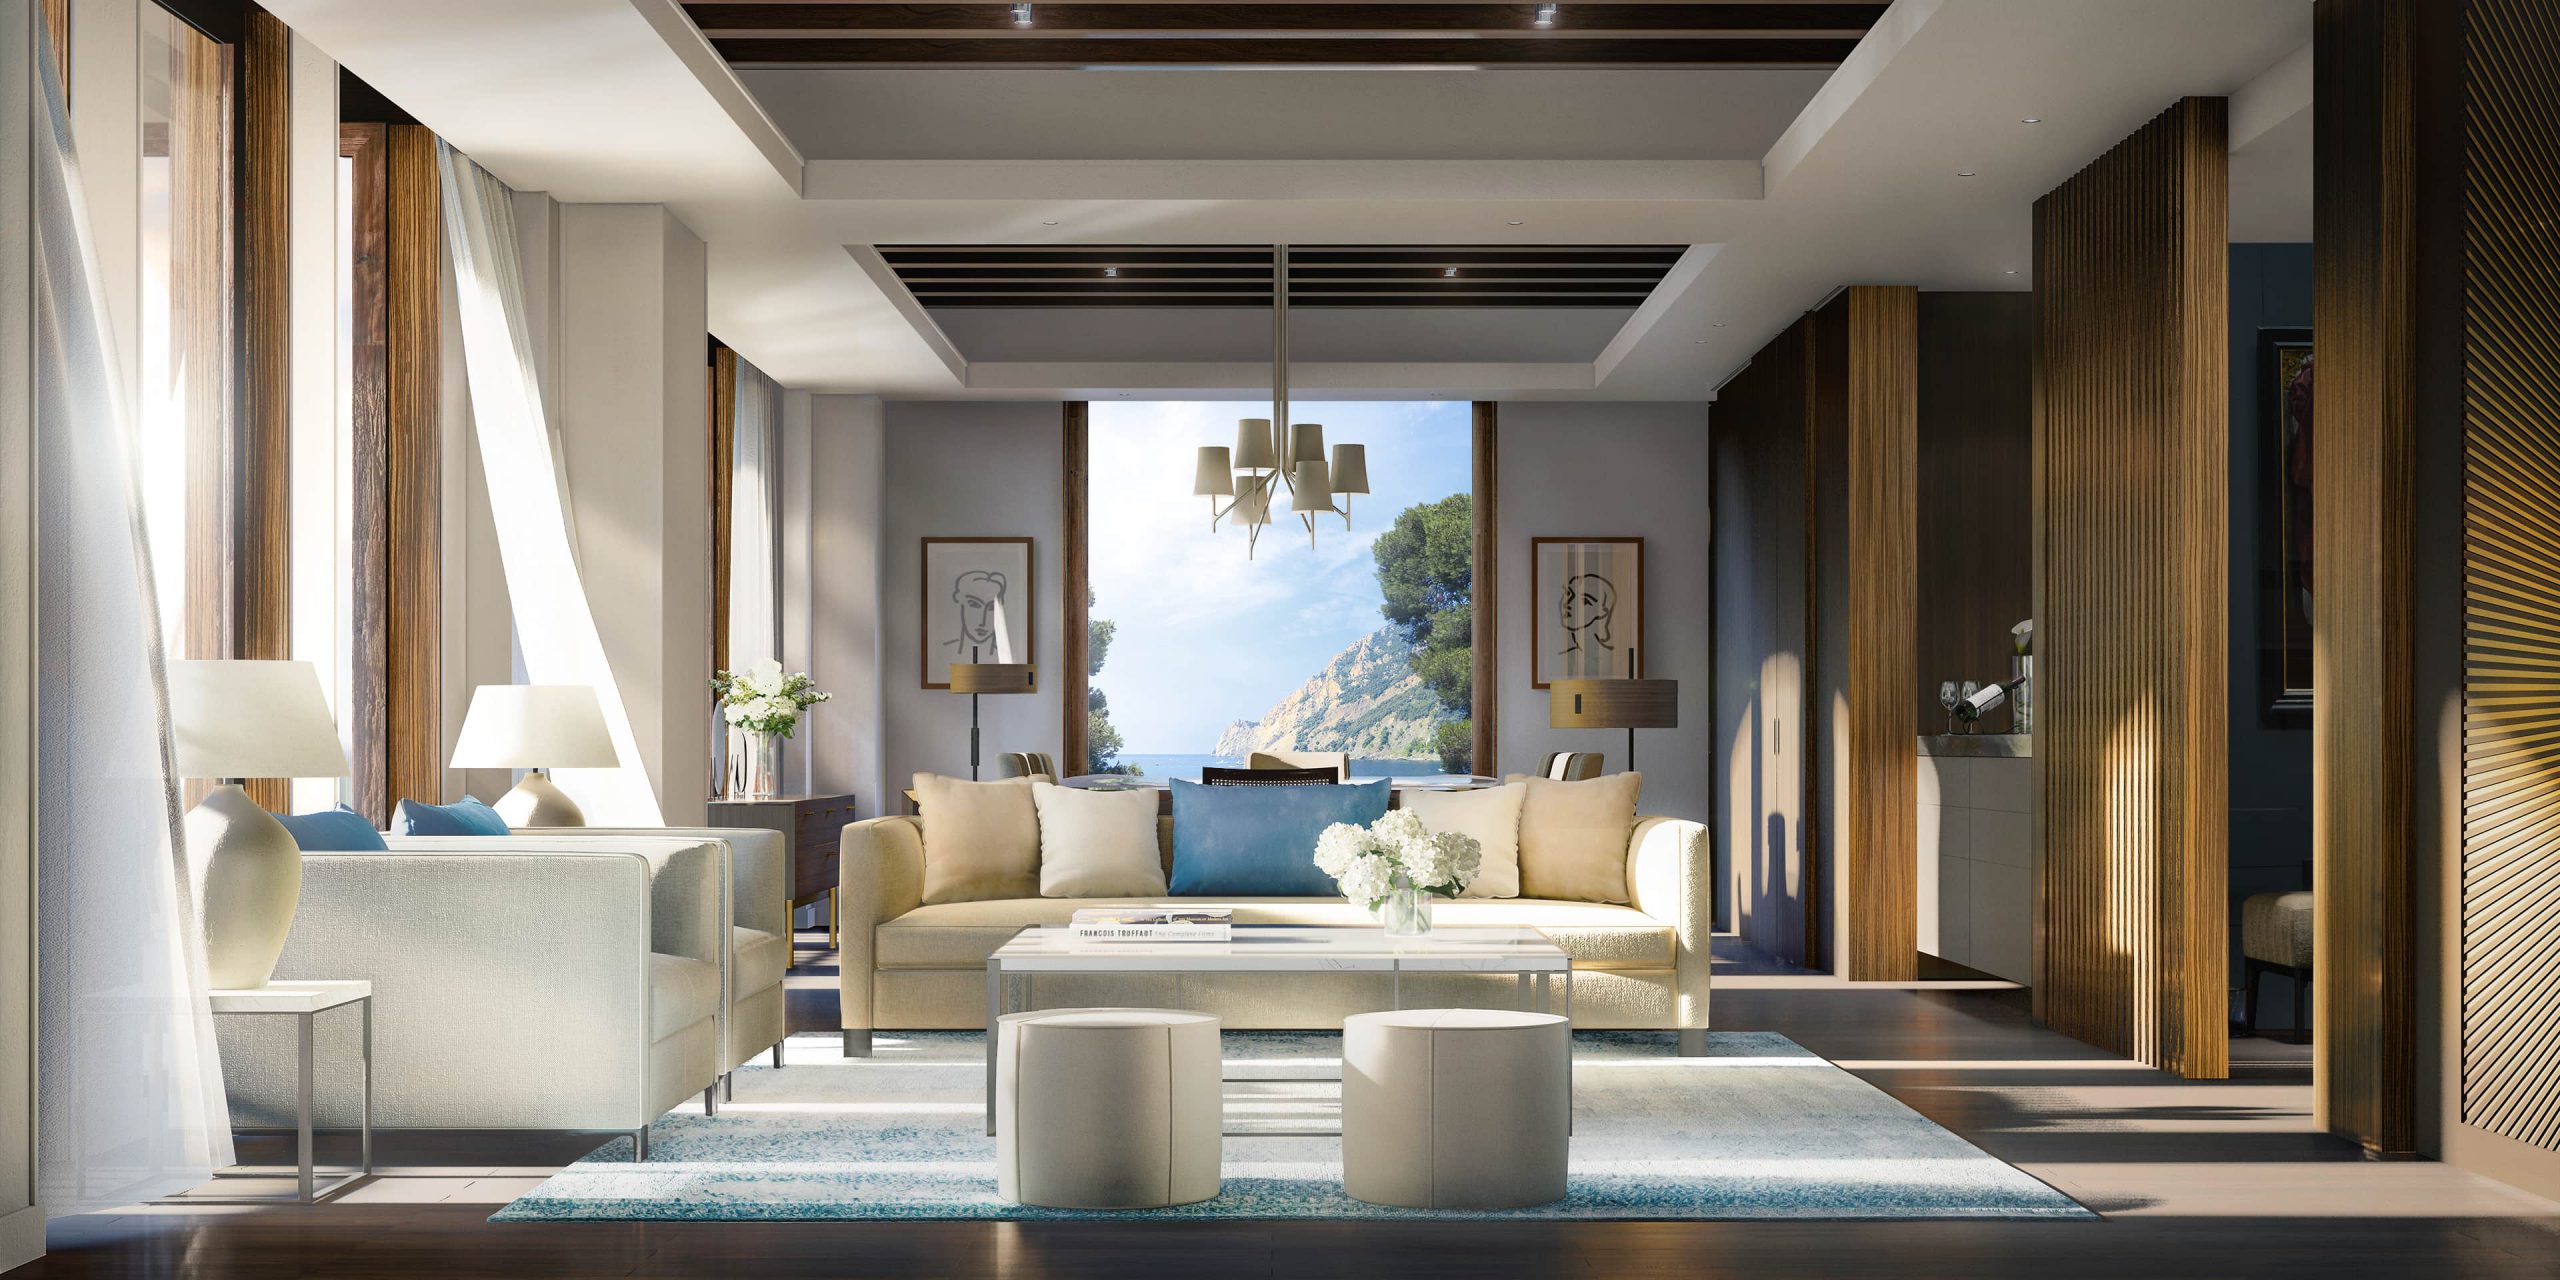 Living Room, Hotel Le Mas. Rendered in Lumion by Ten Over Media.